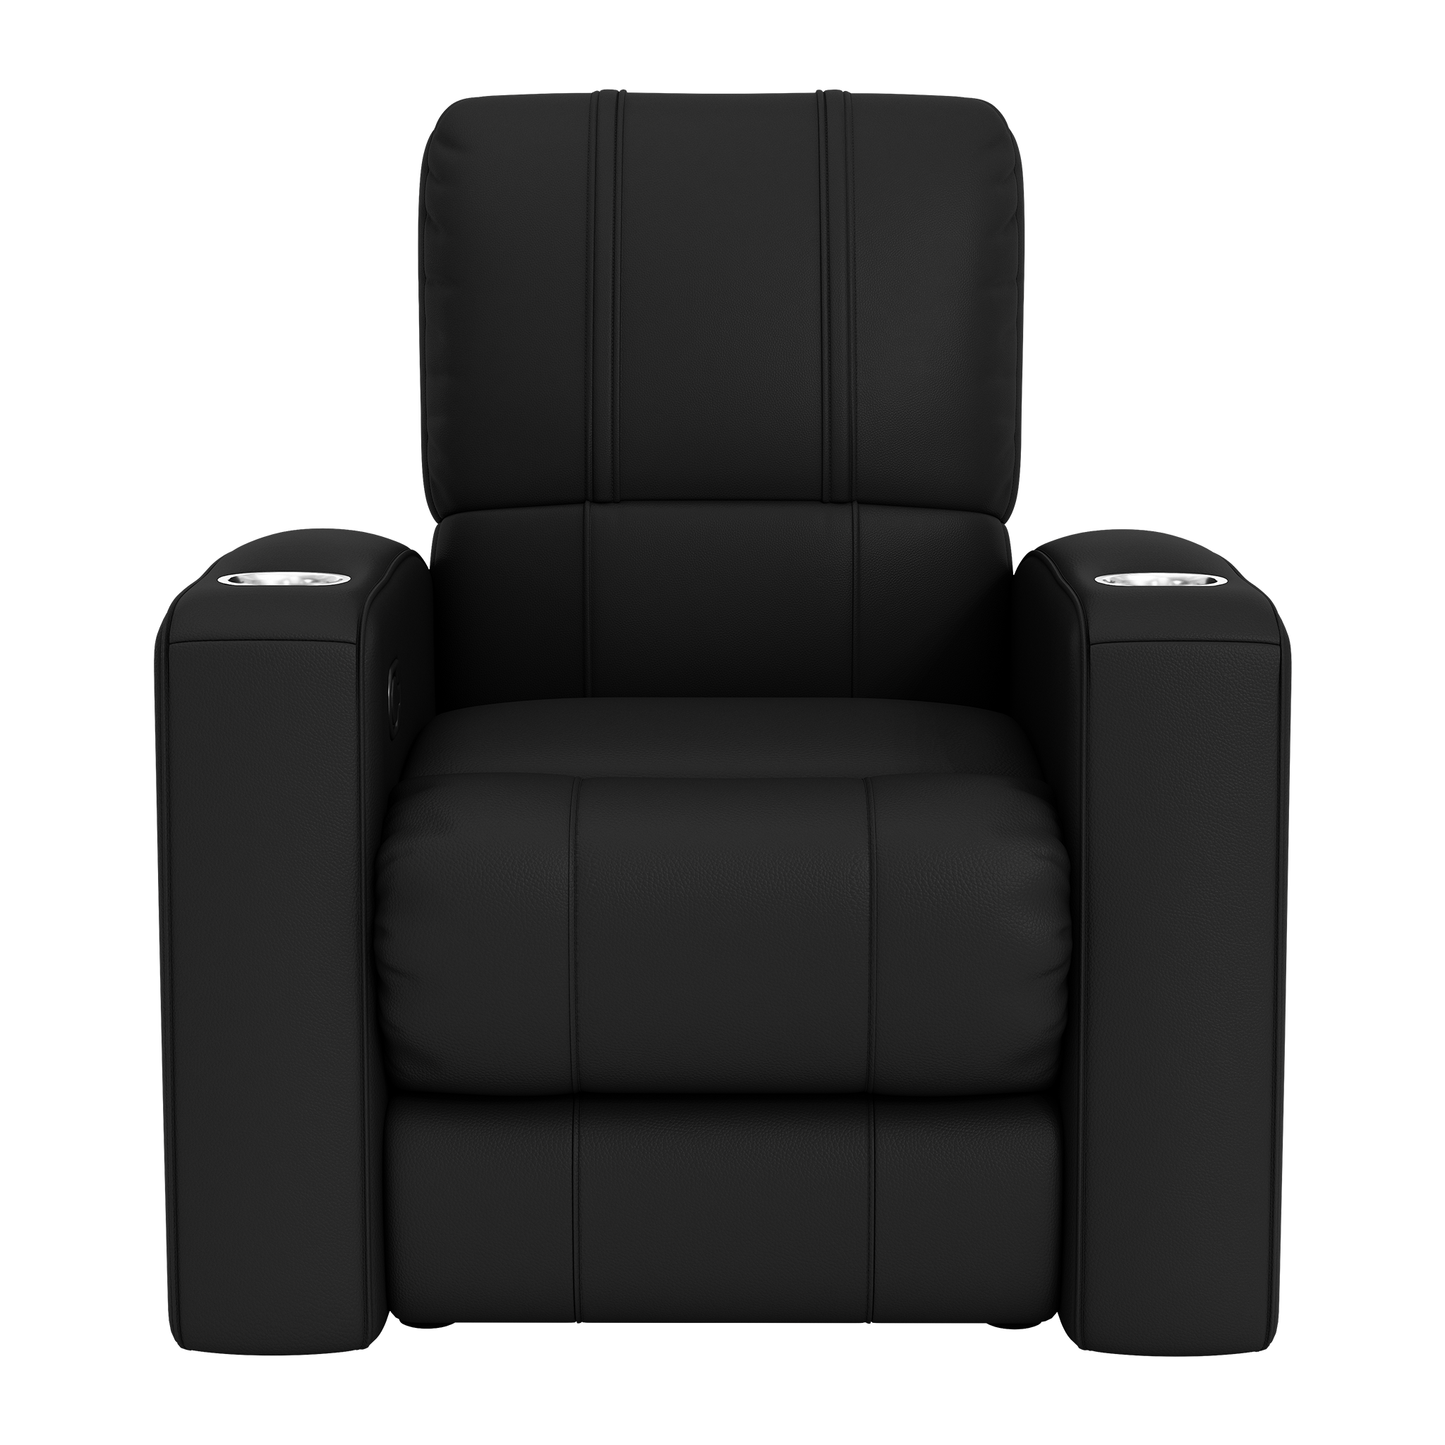 Relax Home Theater Recliner with Cincinnati Reds Cooperstown